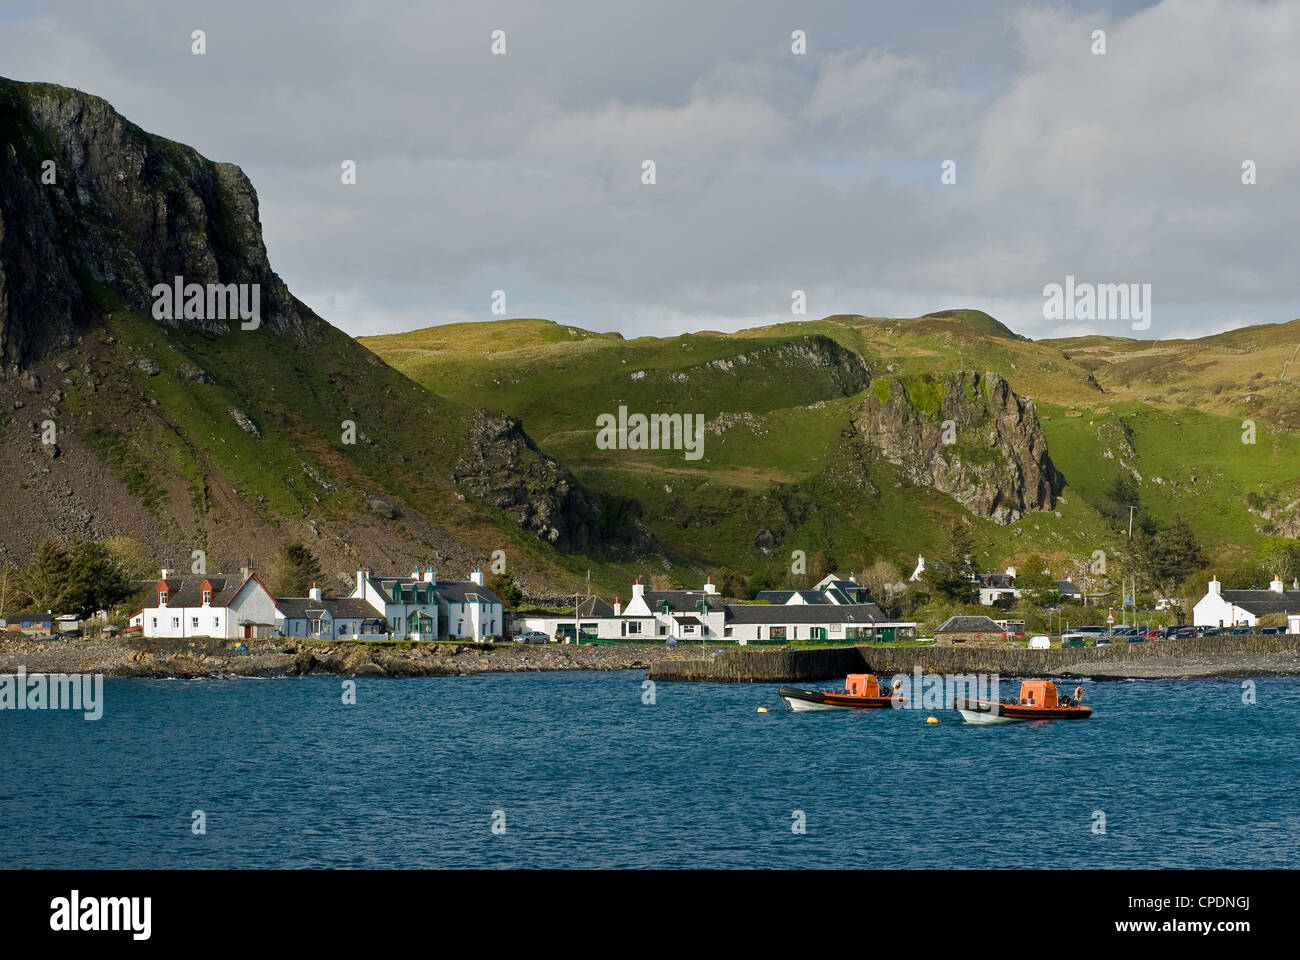 Mountain sides behind village of Ellenabeich with Ribs belonging to Seafarie, a scenic tour company based on the slate island of Easdale. Stock Photo